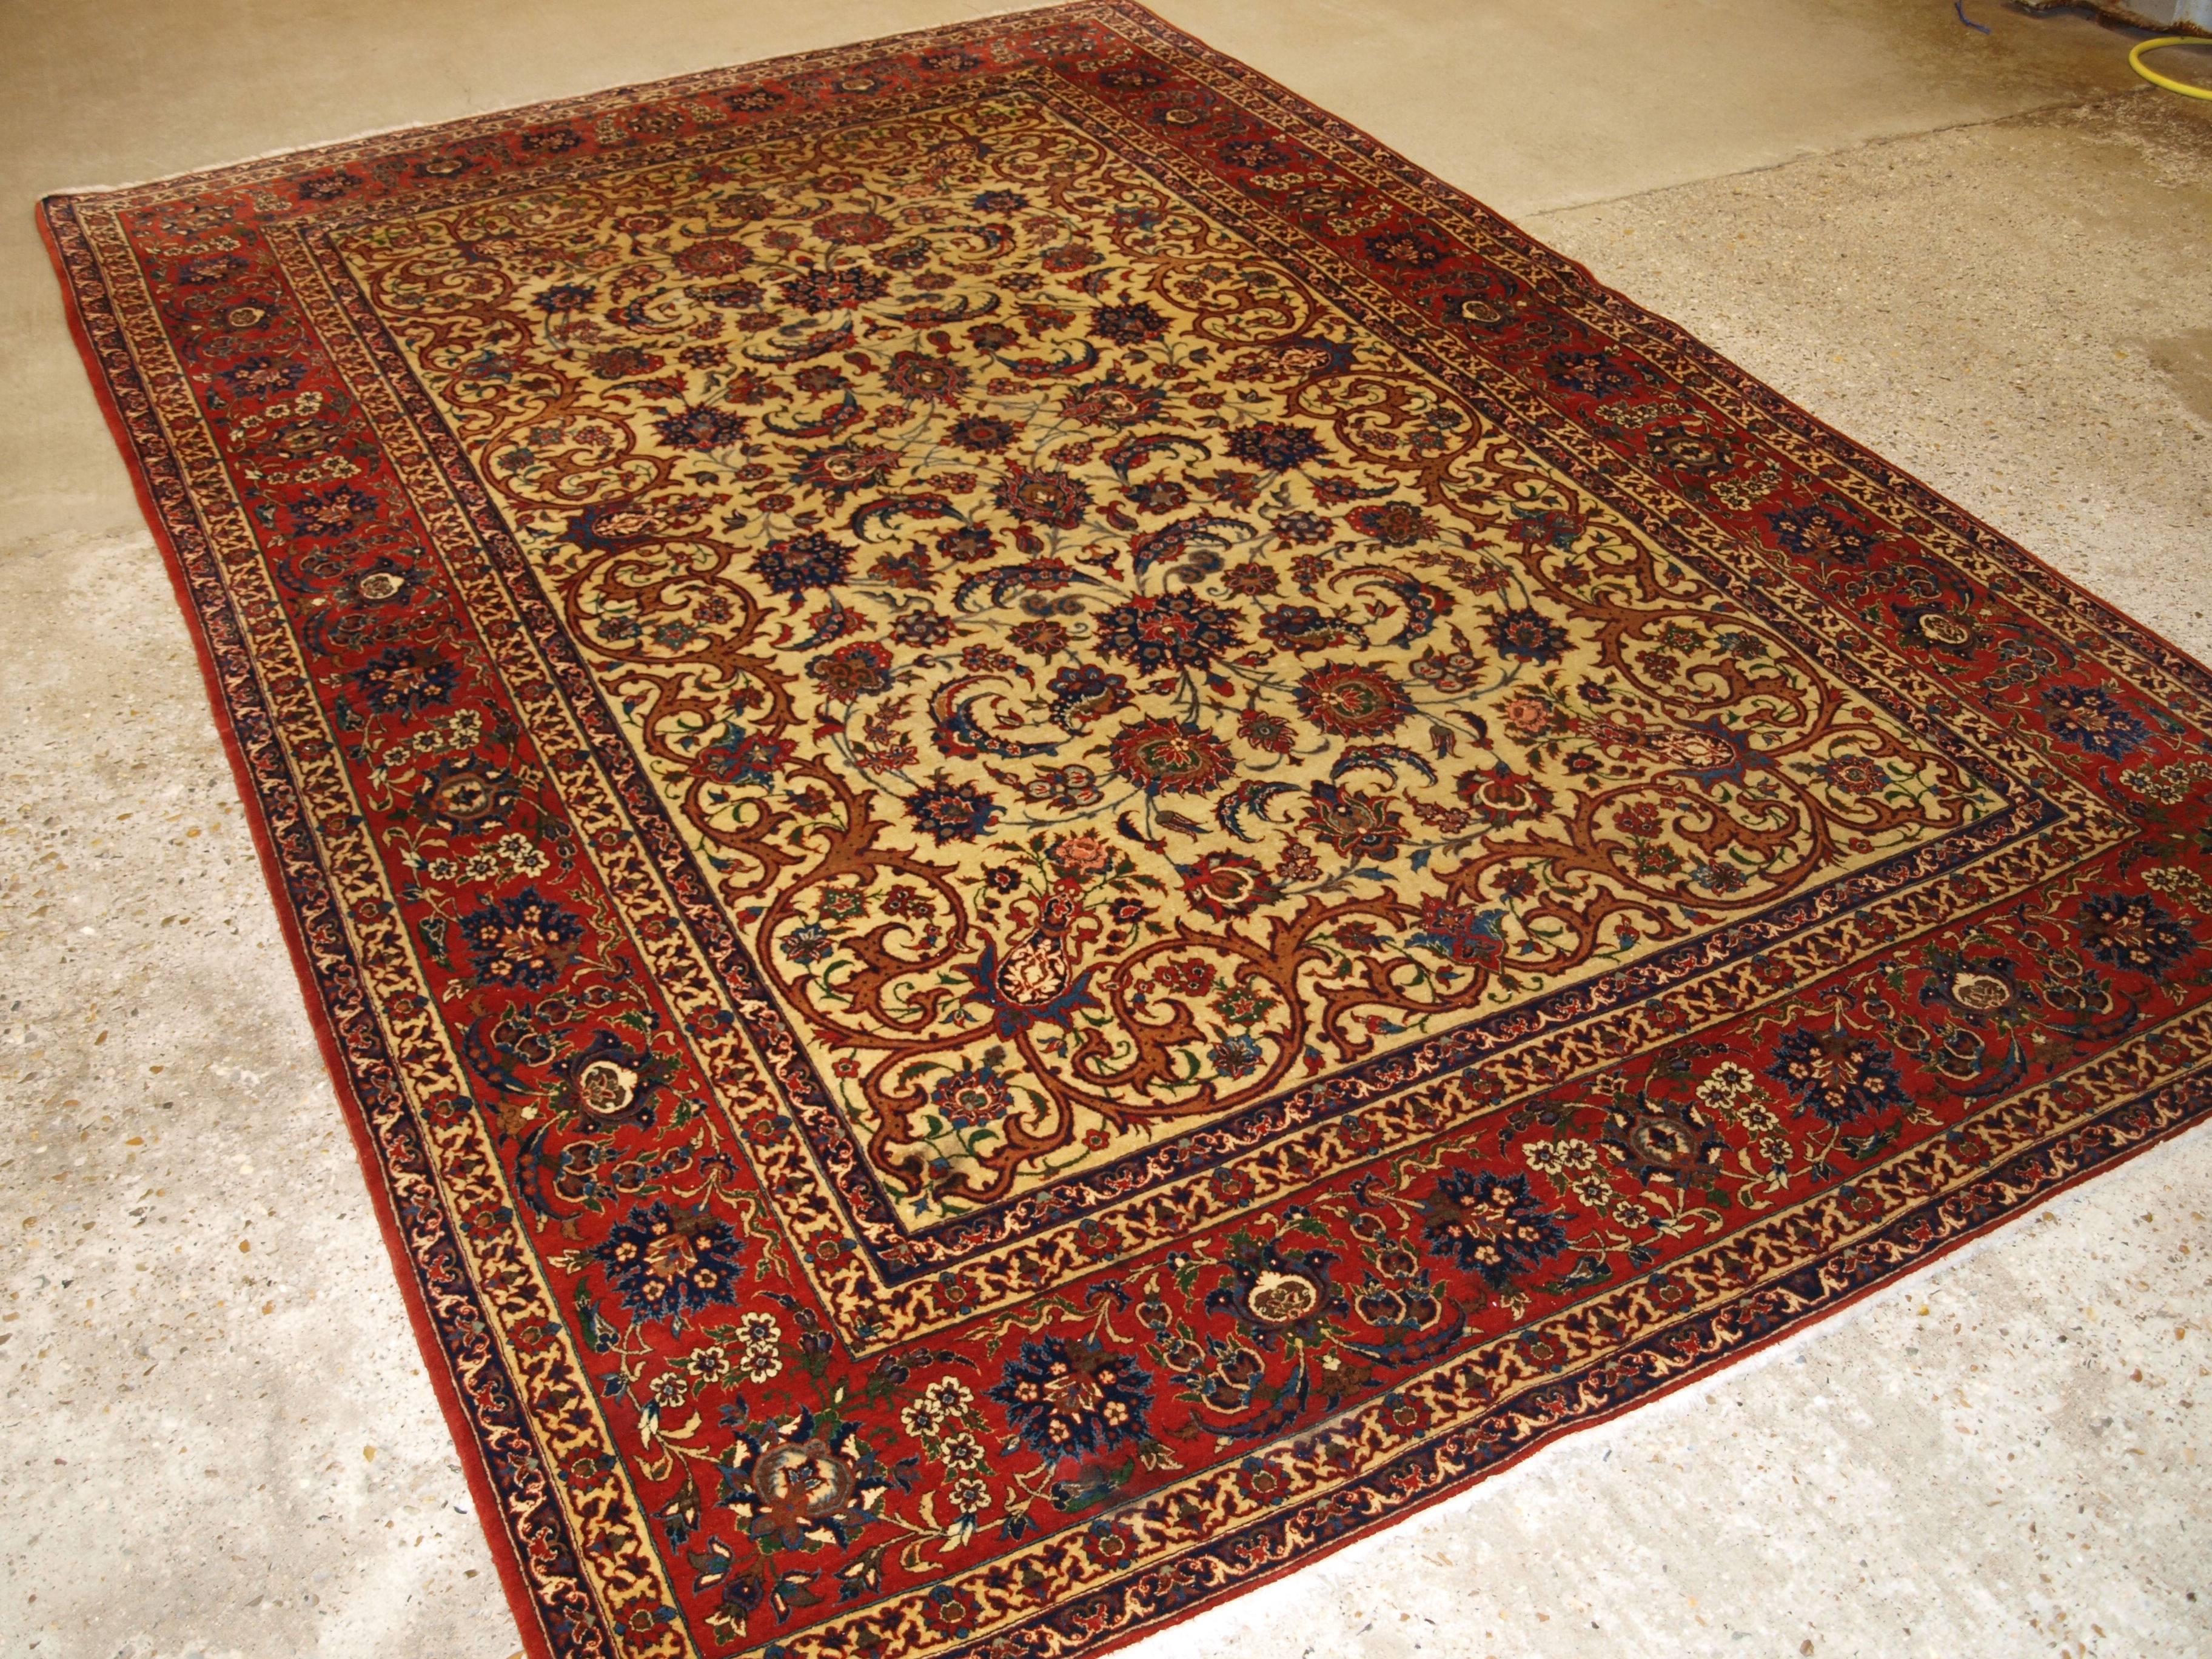 Old Persian Isfahan Carpet, of Superb Classic Design, Outstanding Color For Sale 3